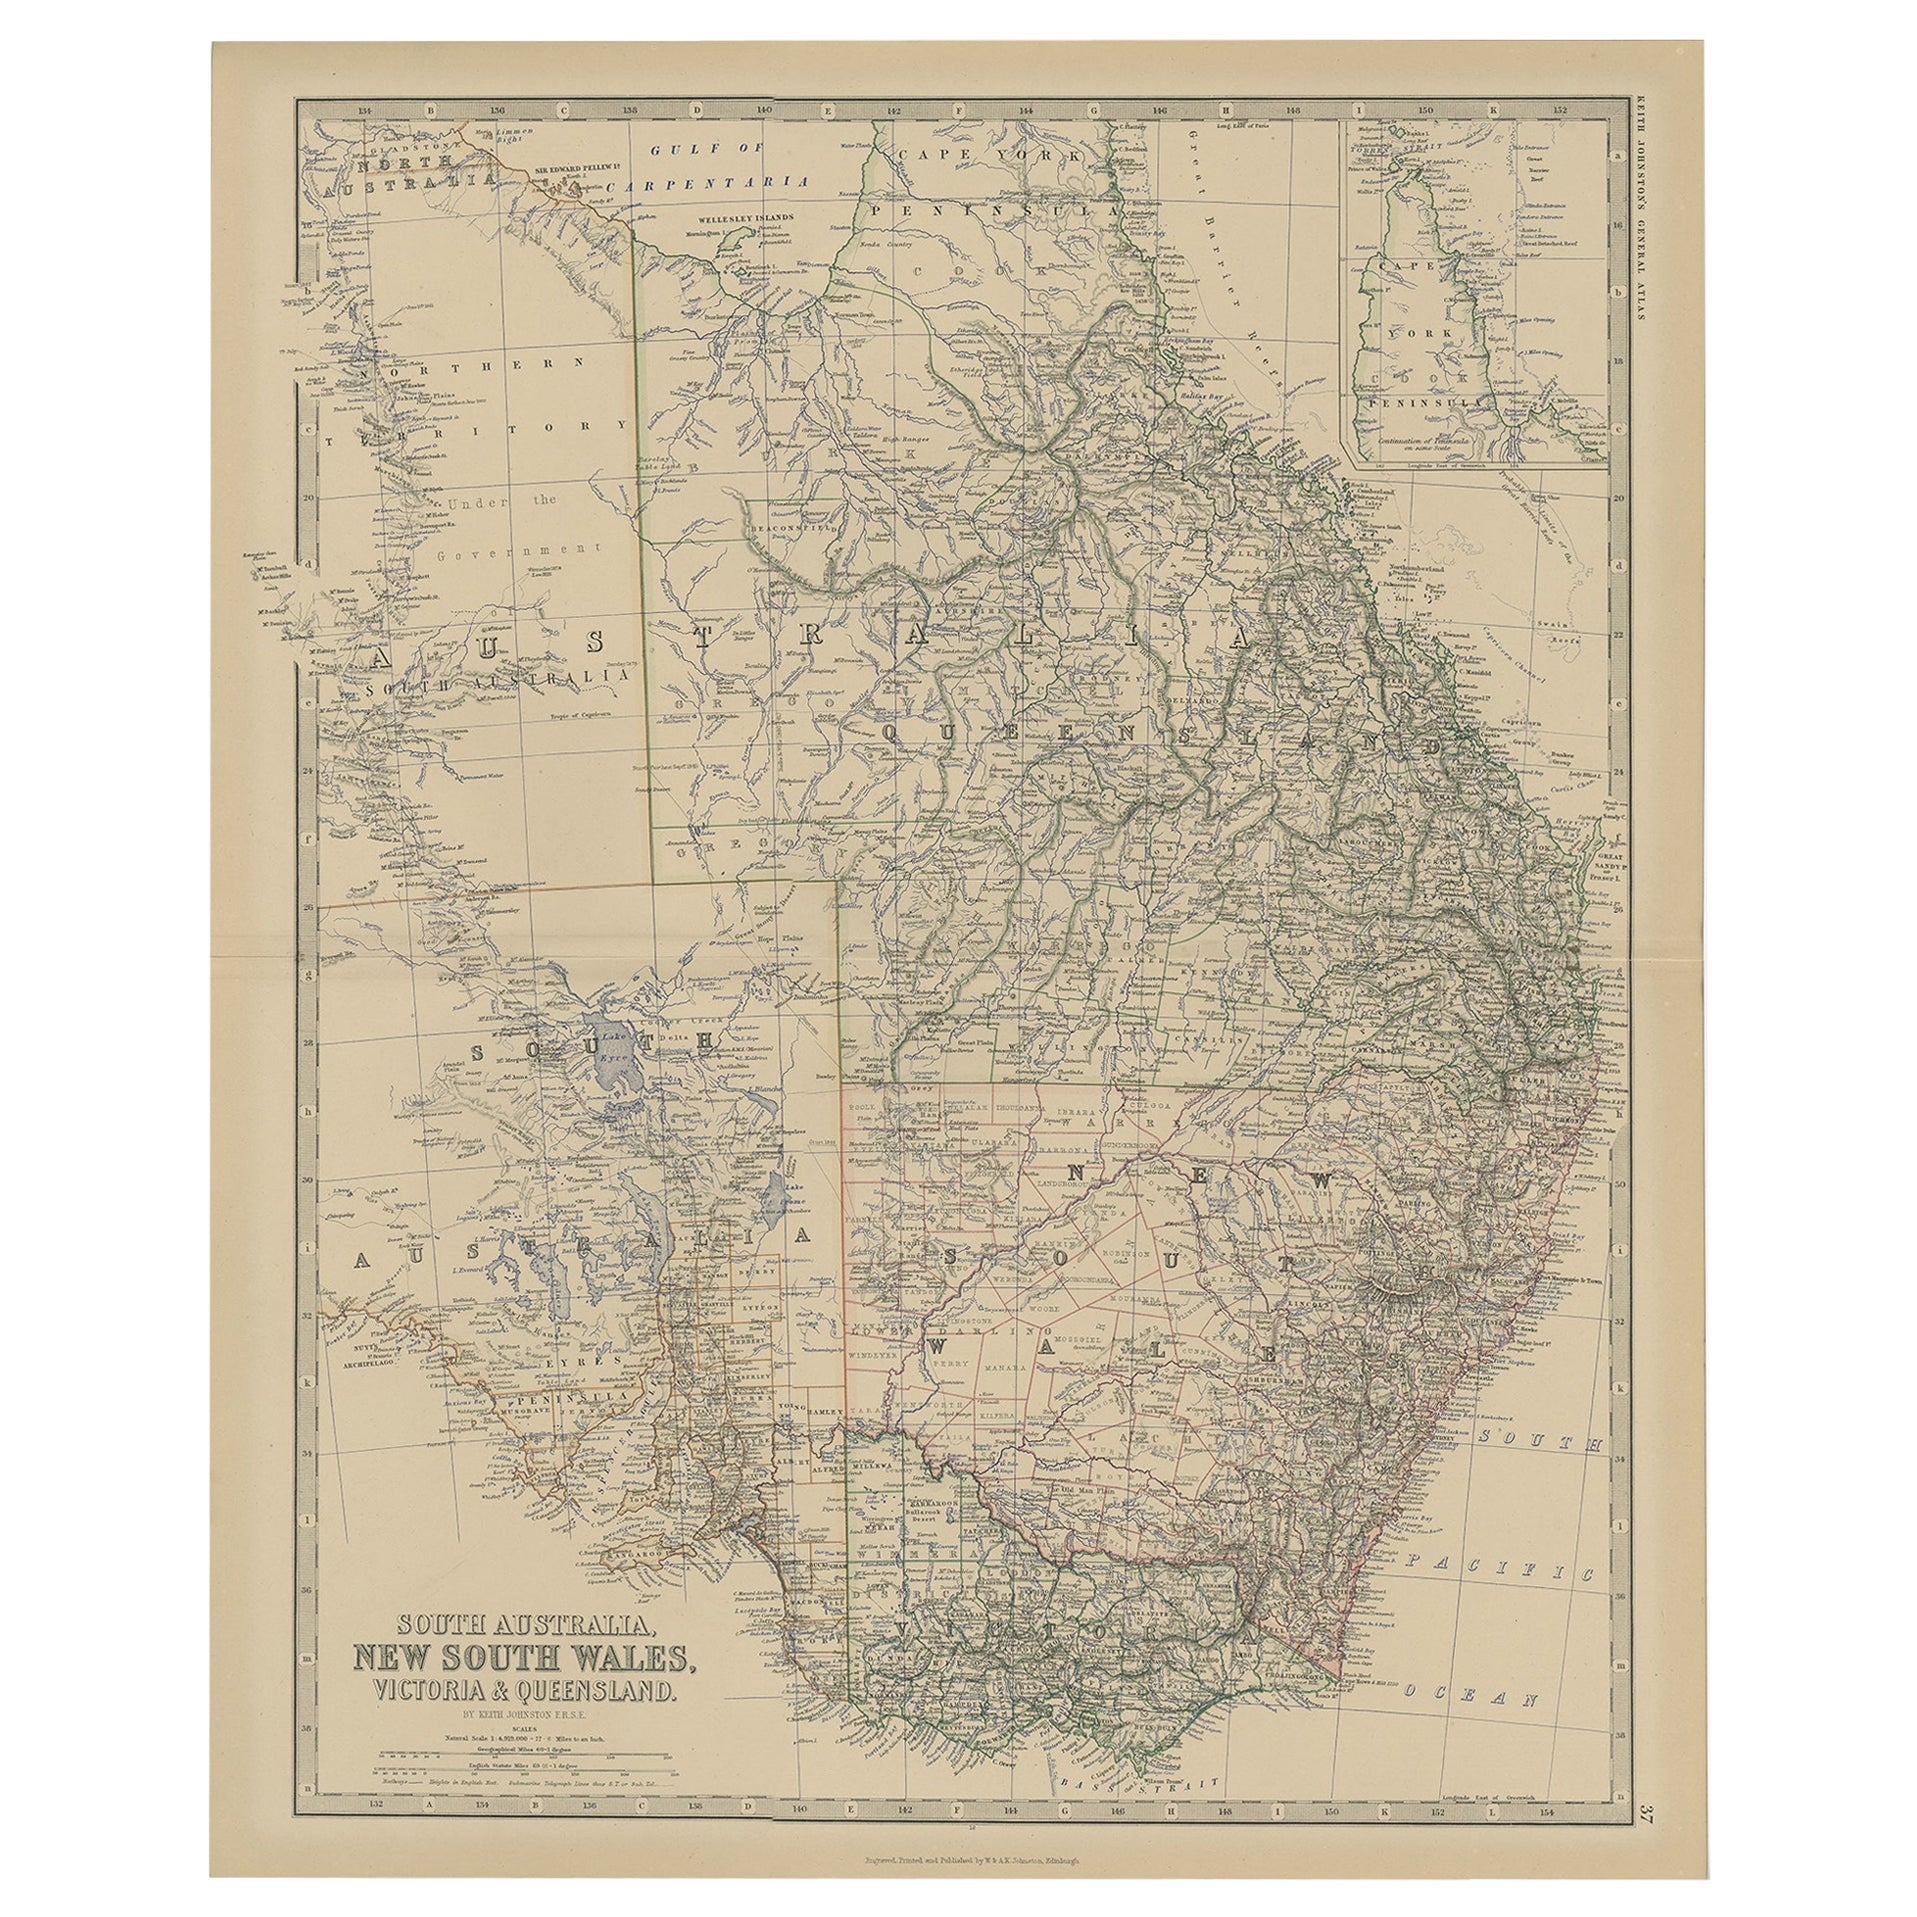 Old Map of Southern Australia, with an Inset Map of Cape York Peninsula, 1882